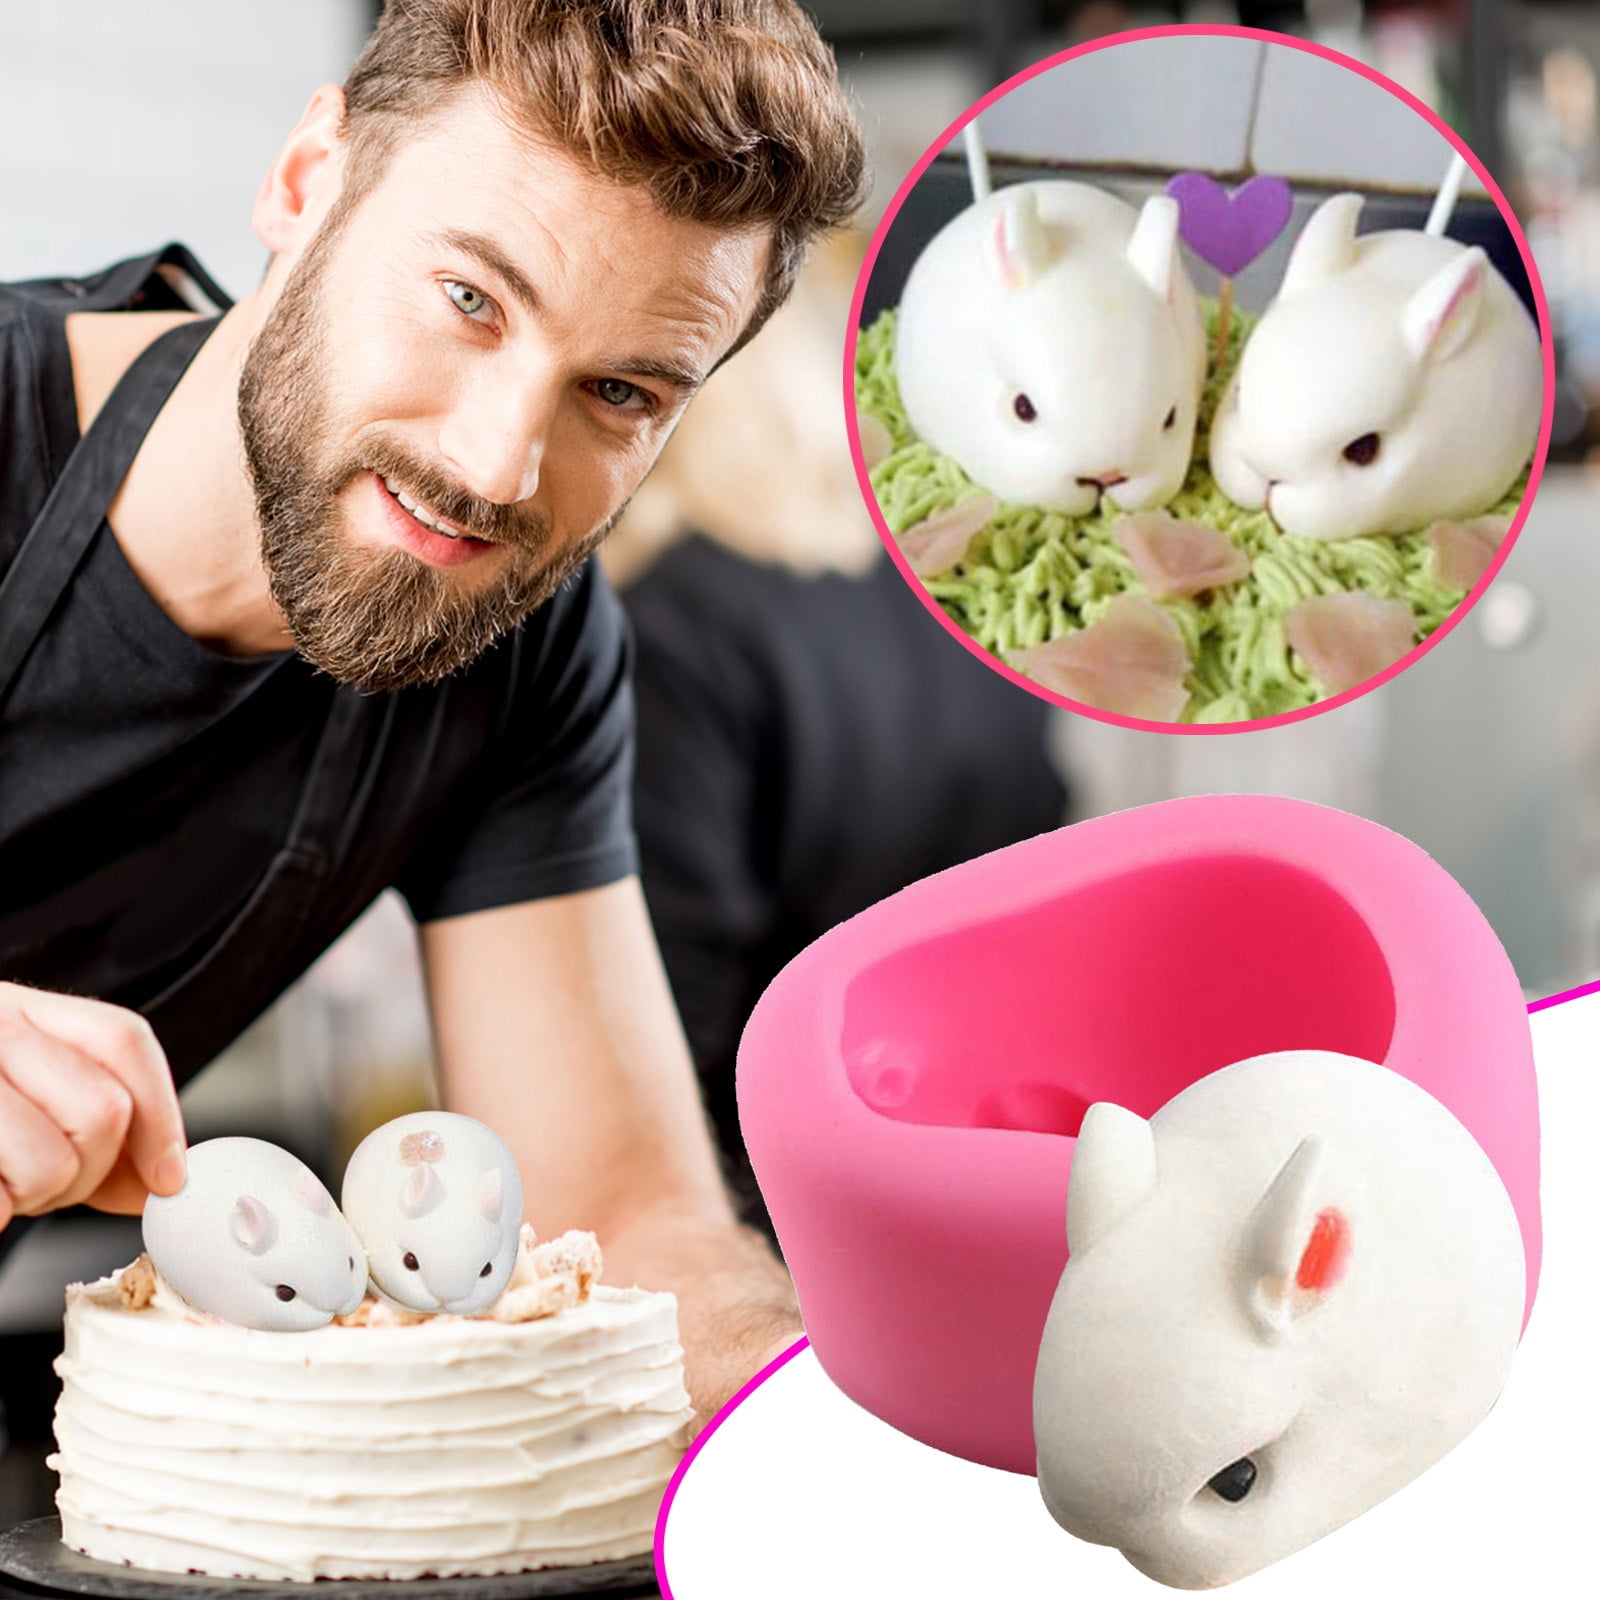 Details about   Happy Birthday Cake 3D Silicone Mold Fondant Mould Decorating Chocolate Baking 